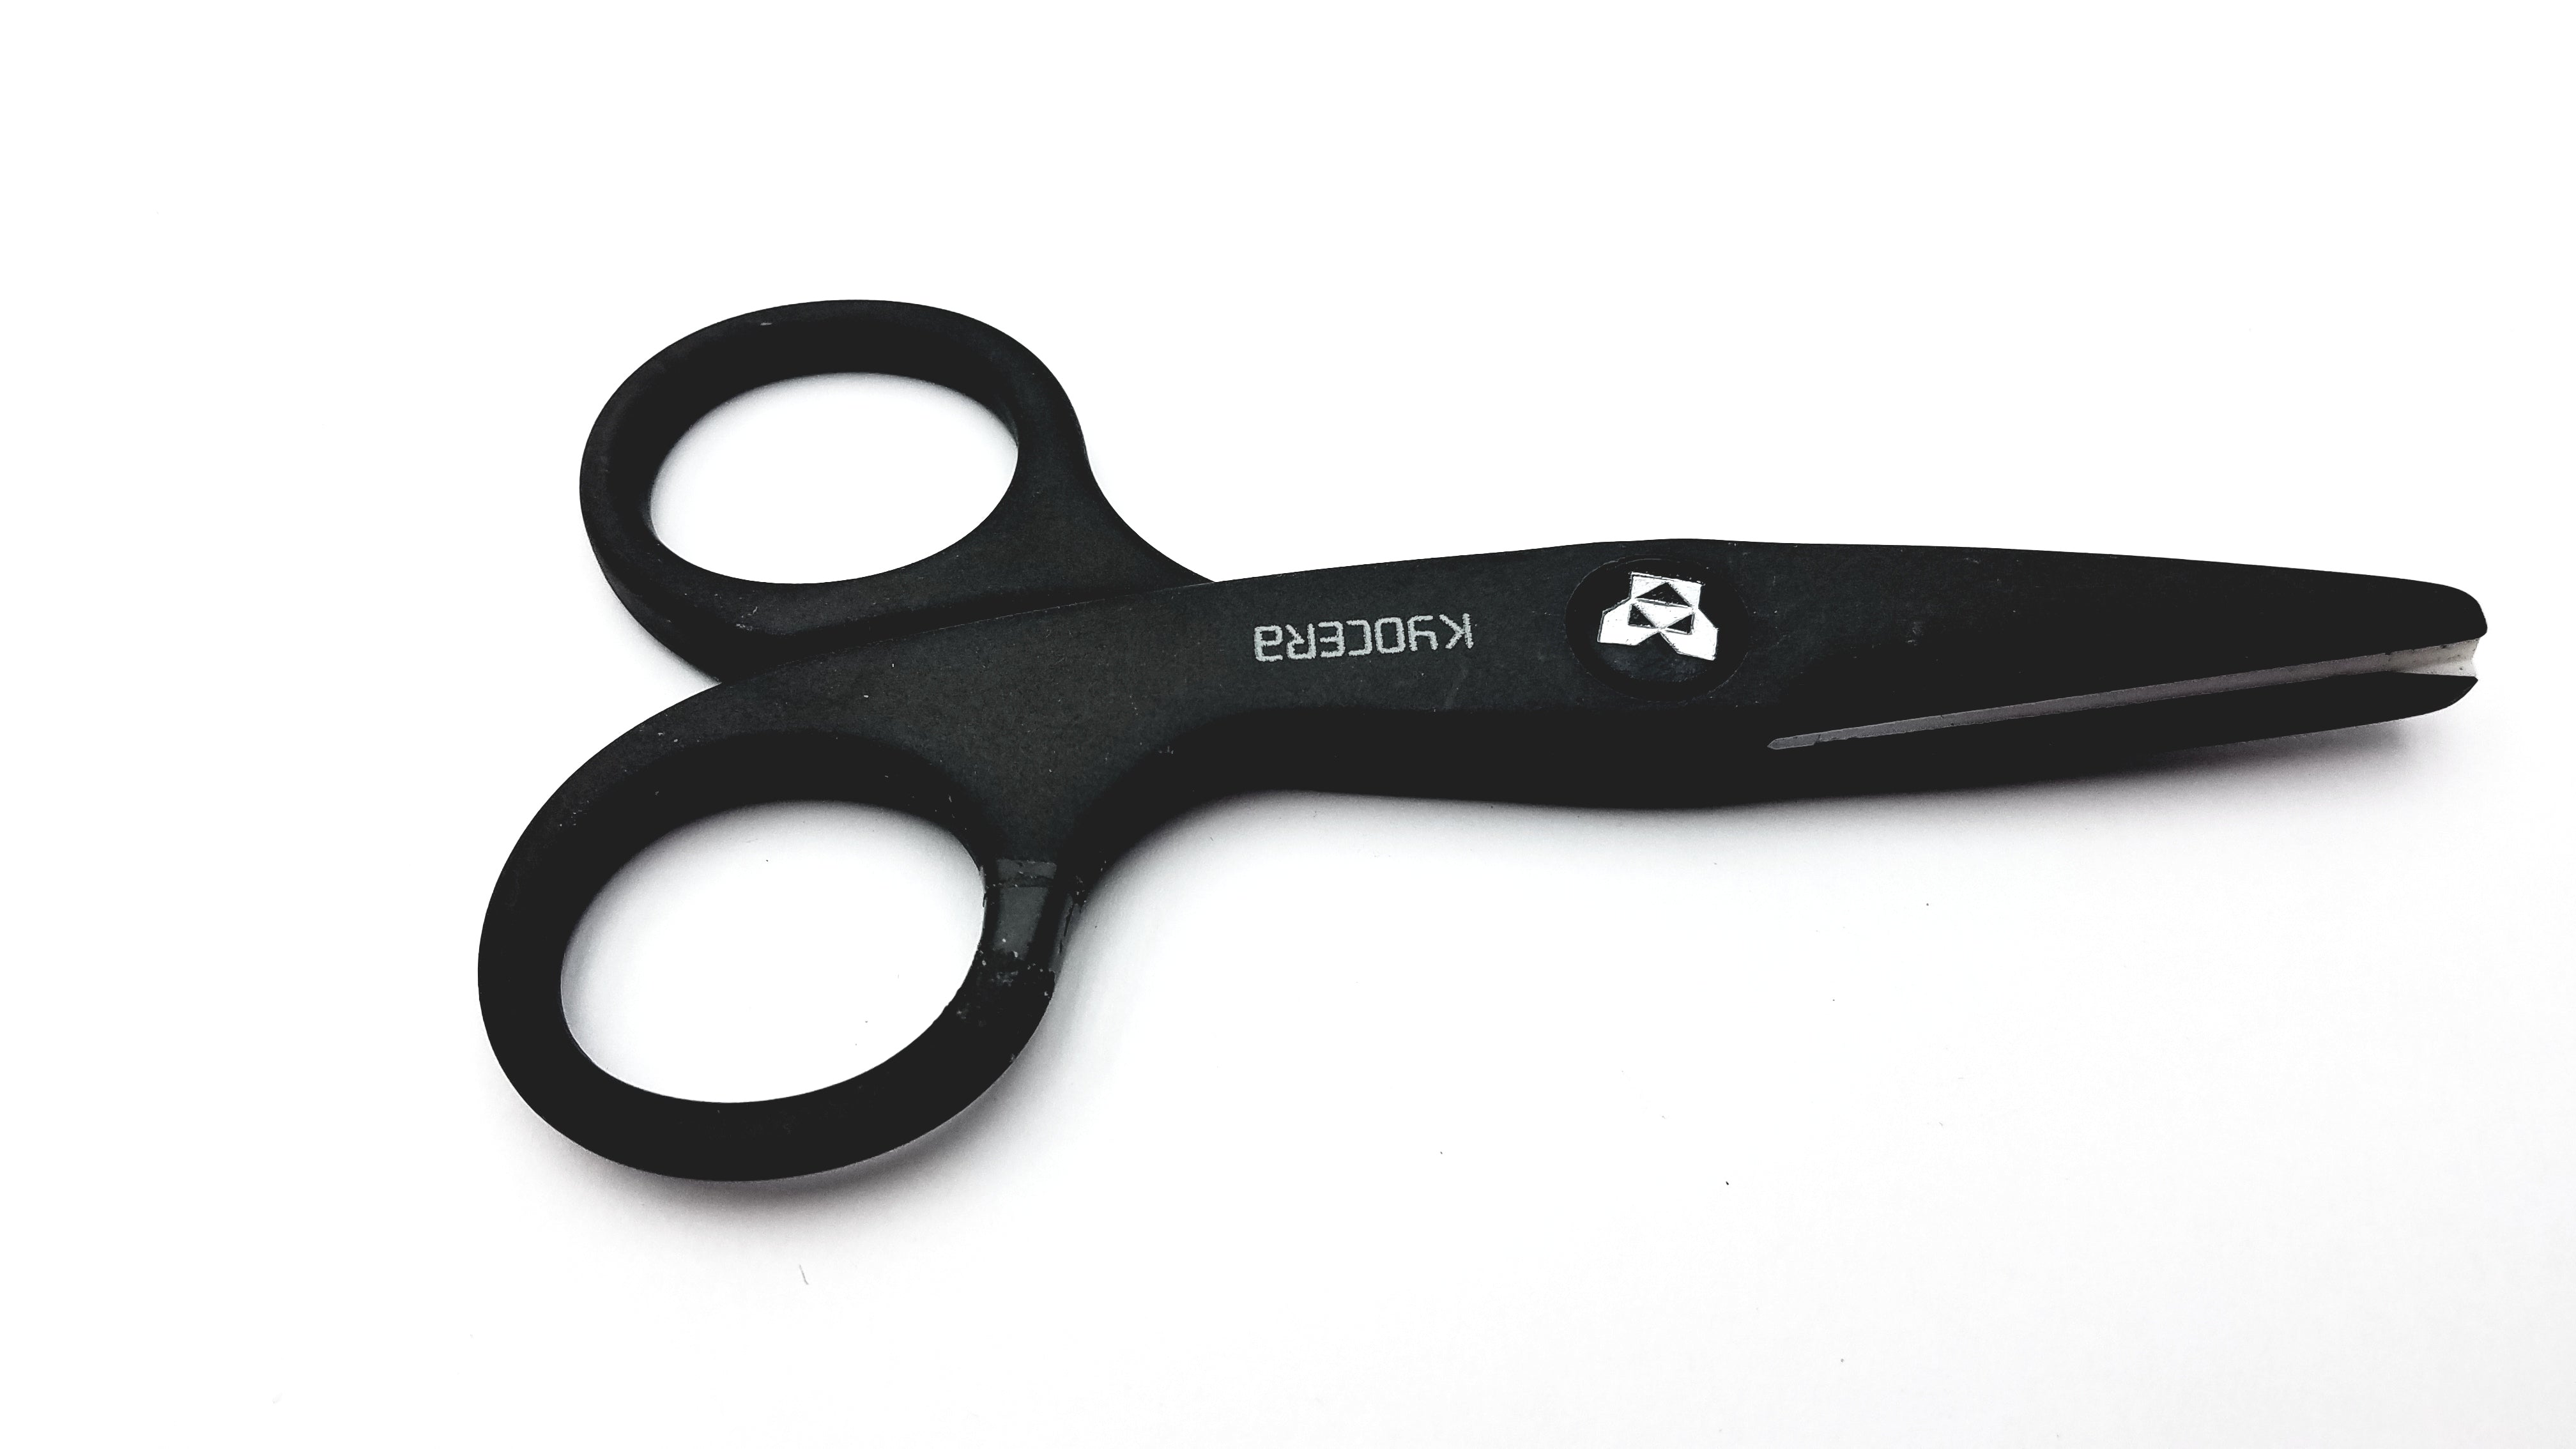 KYOCERA > Ceramic scissors are rust-proof, lightweight, non-conductive and  easy to clean.